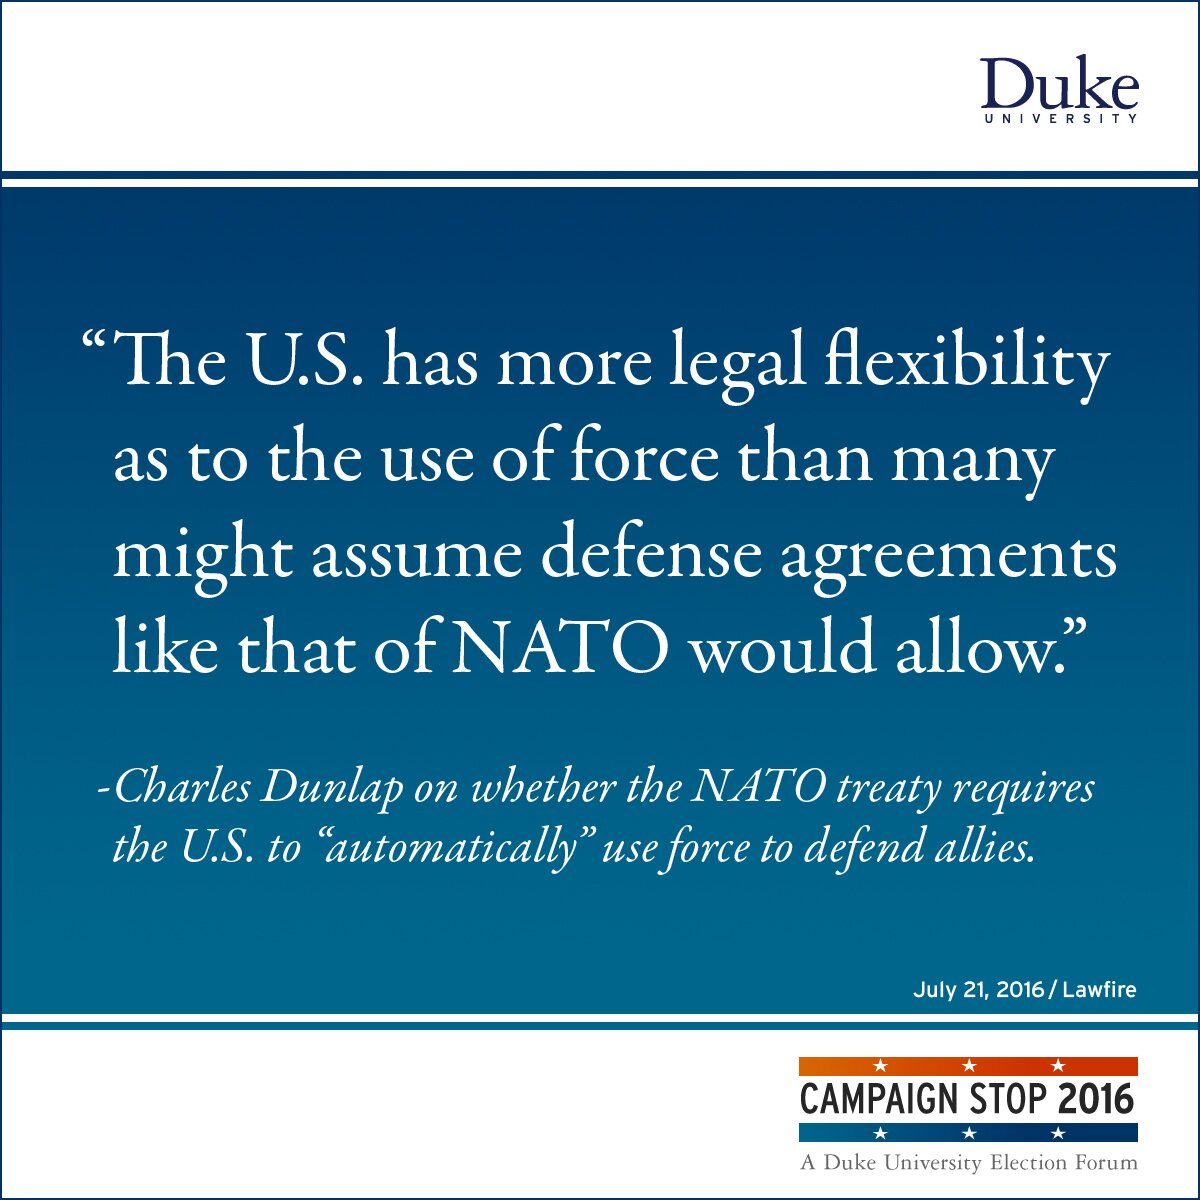 “The U.S. has more legal flexibility as to the use of force than many might assume defense agreements like that of NATO would allow.” -Charles Dunlap on whether the NATO treaty requires the U.S. to “automatically” use force to defend allies.